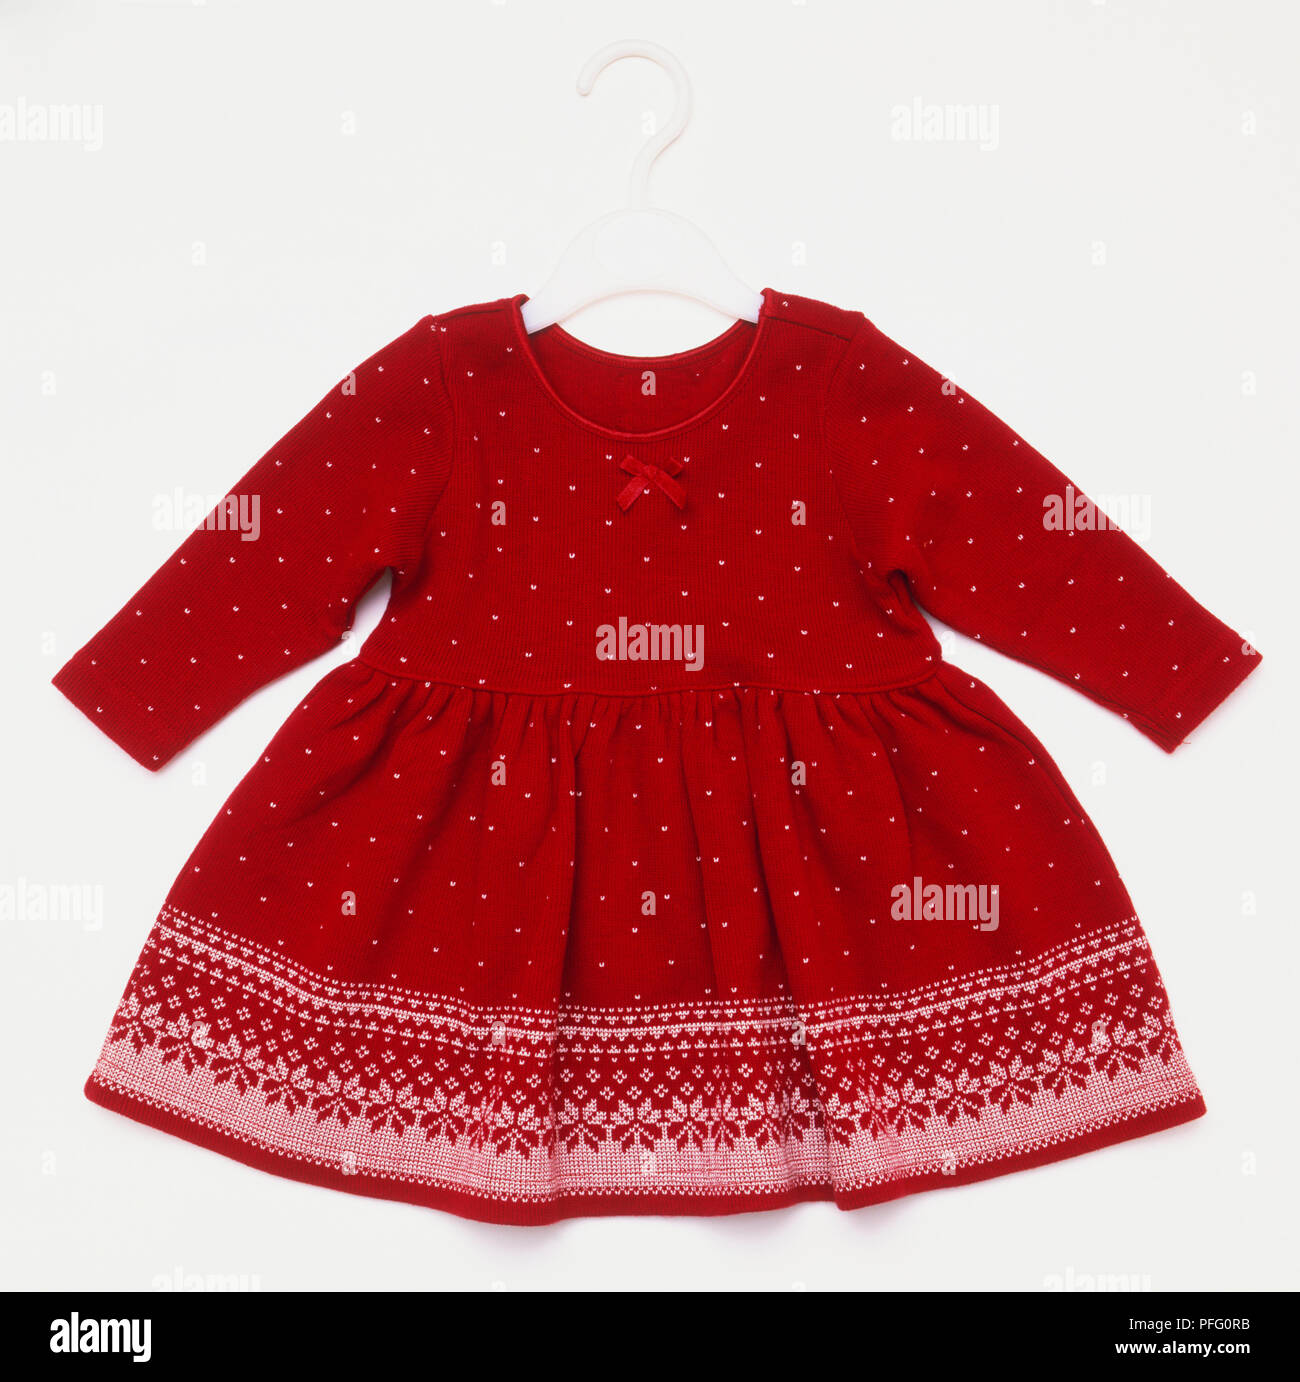 Red child's dress with with white polka dots and a wide white border in a snowflake design Stock Photo